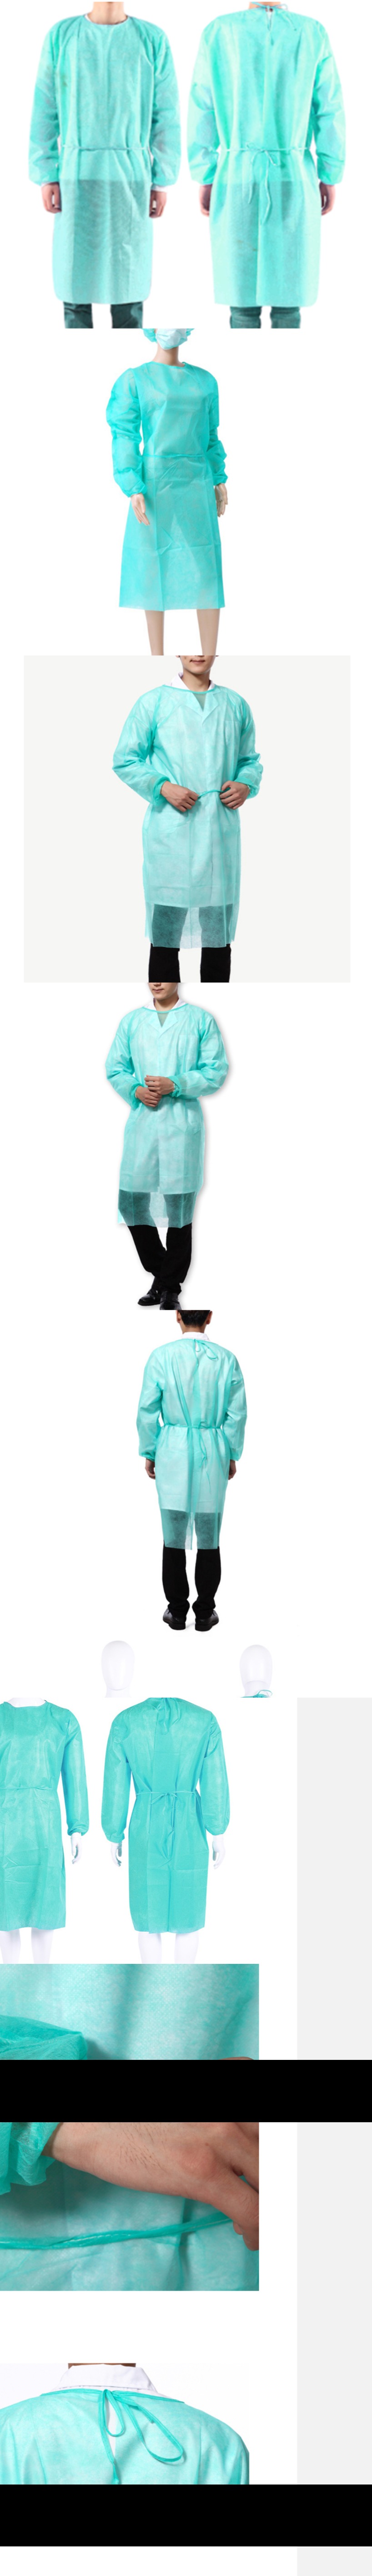 Isolation Gown, Medical Gown, Medical Clothes, Isolation Gowns, Disposable Isolation Clothes, Disposable Gown, Doctor Surgical Isolation Gown, Isolation Blouse, Medical Aprons, Medical Covers, Reusable Isolation Gowns, ICU Gown,